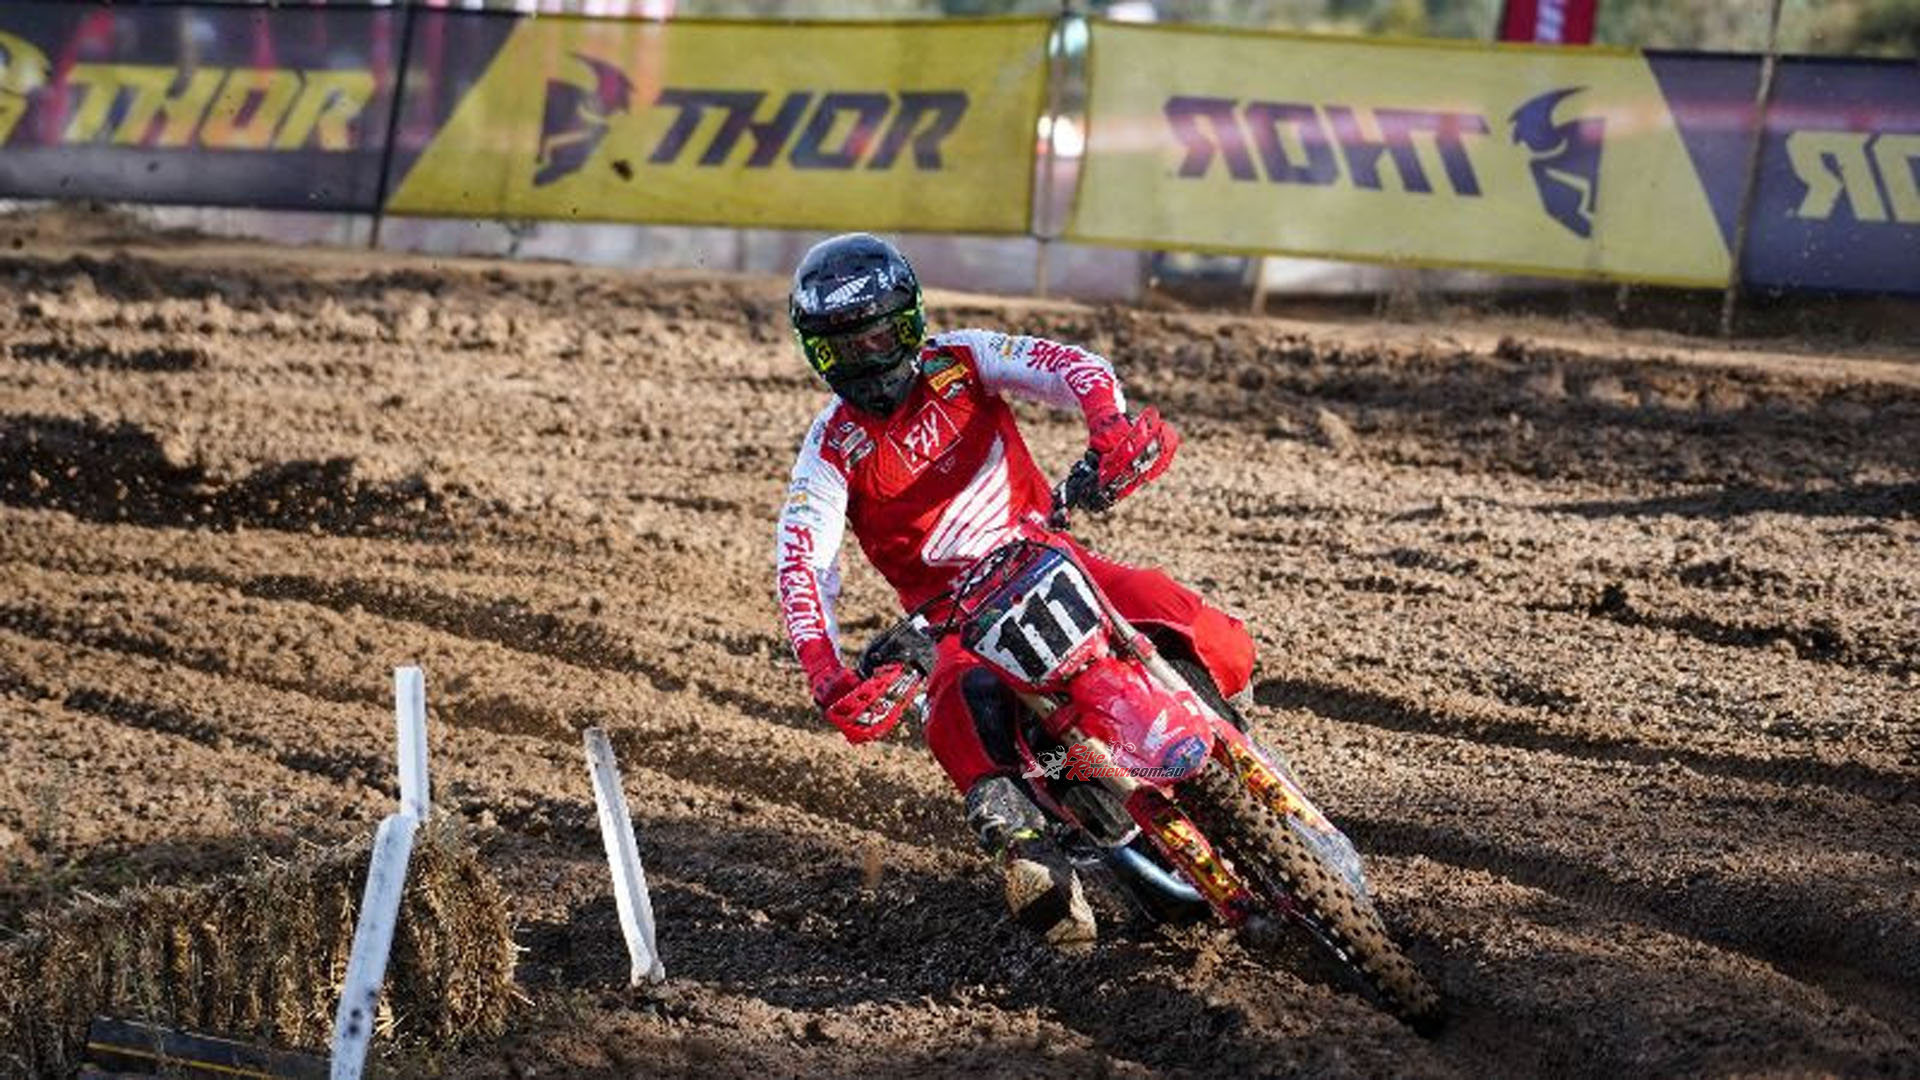 Wodonga in Victoria played host to Round 3 of the Penrite ProMX Championship presented by AMX Superstores.